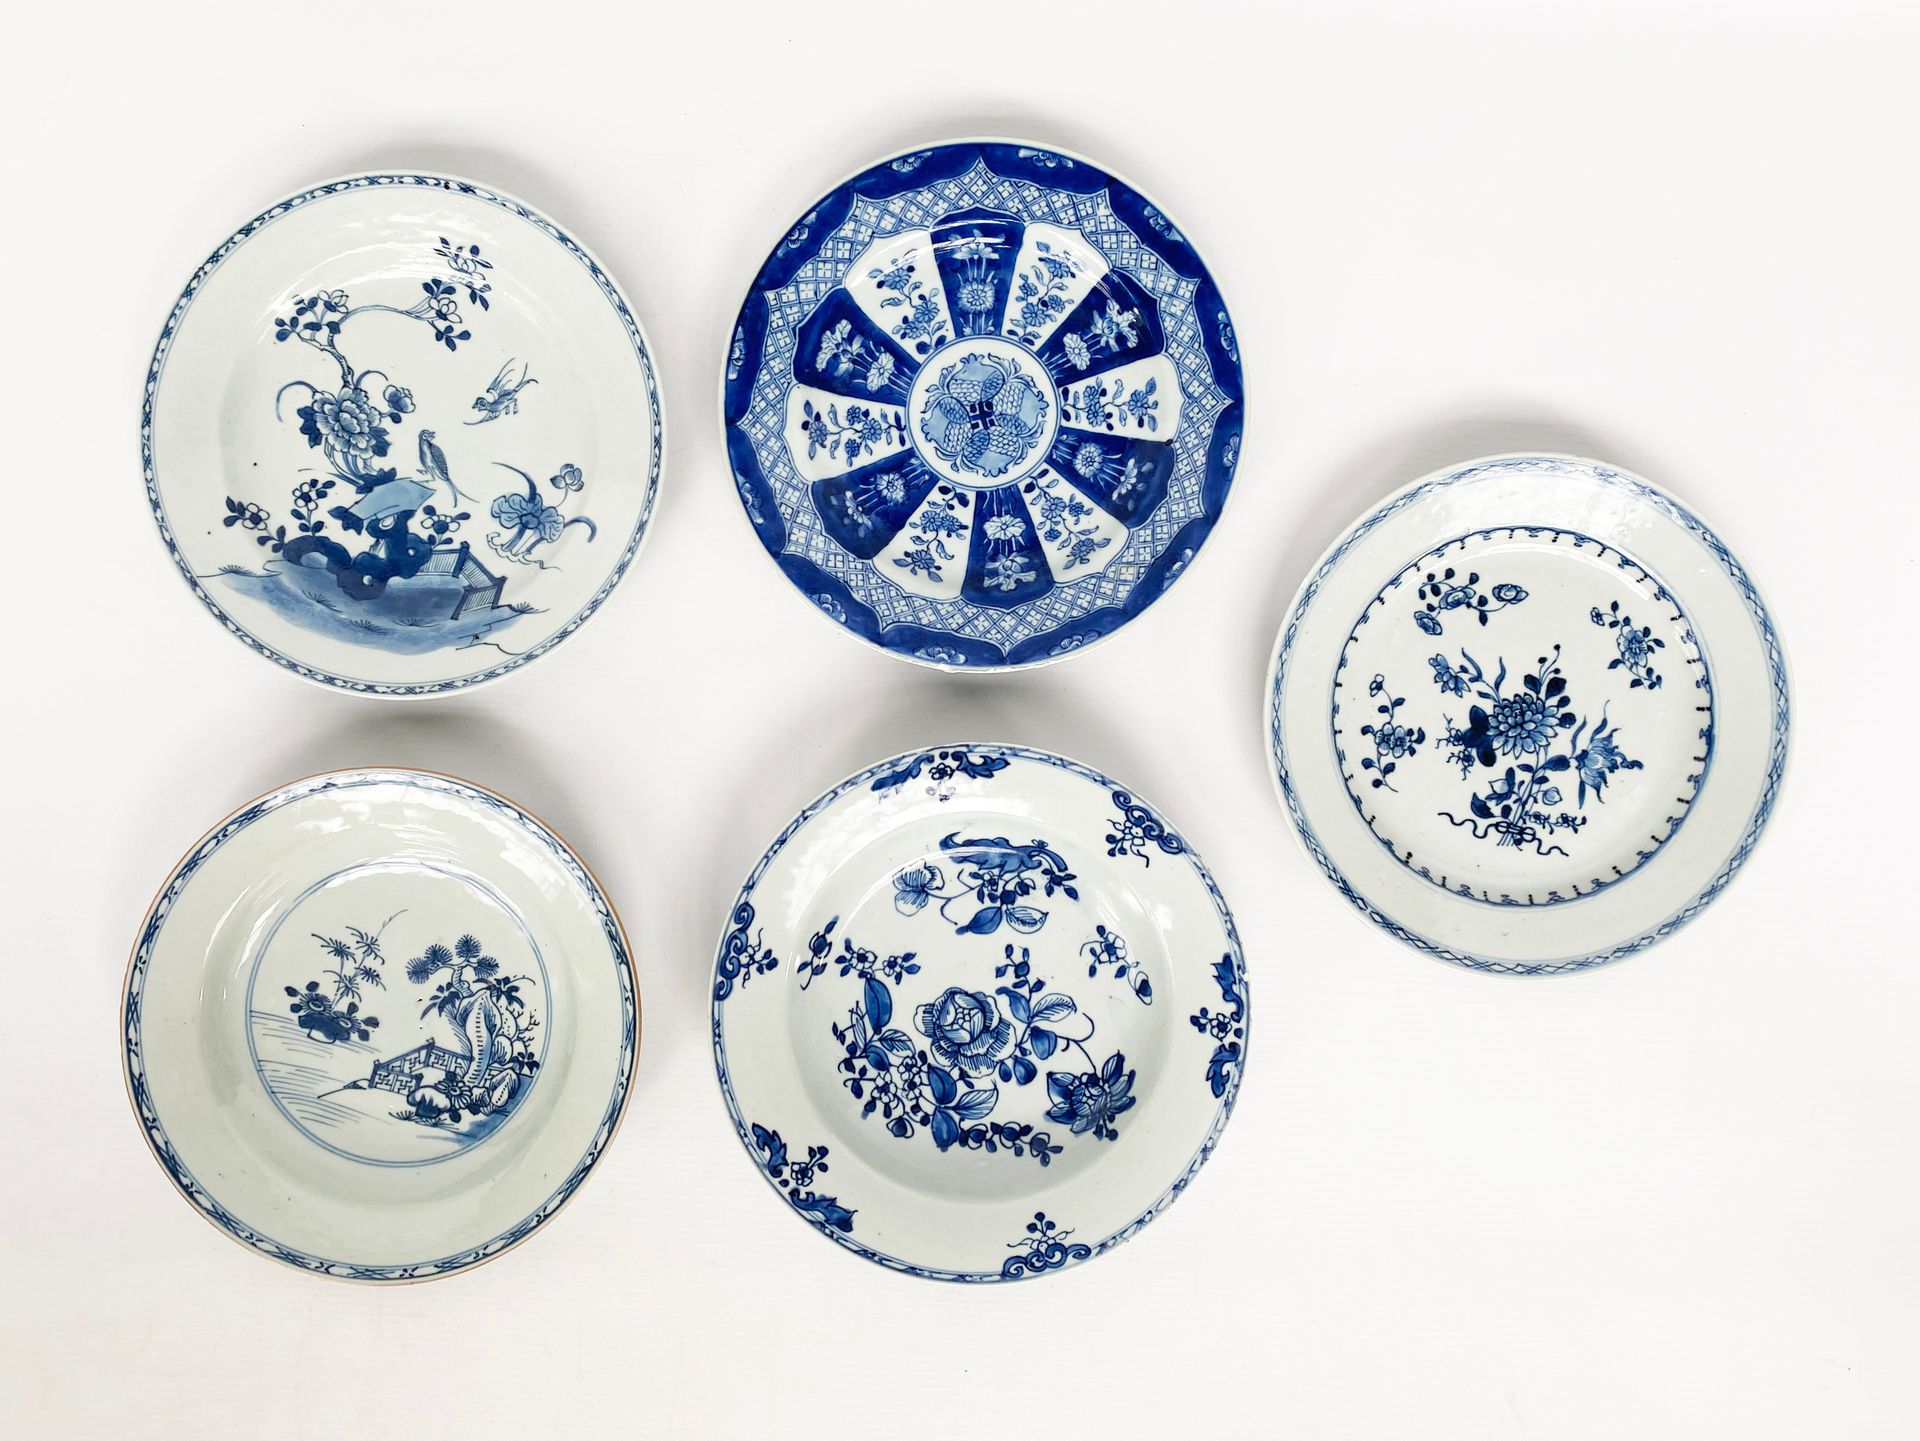 Null CHINA, 17th century and 19th century for export

Set of 5 porcelain soup pl&hellip;